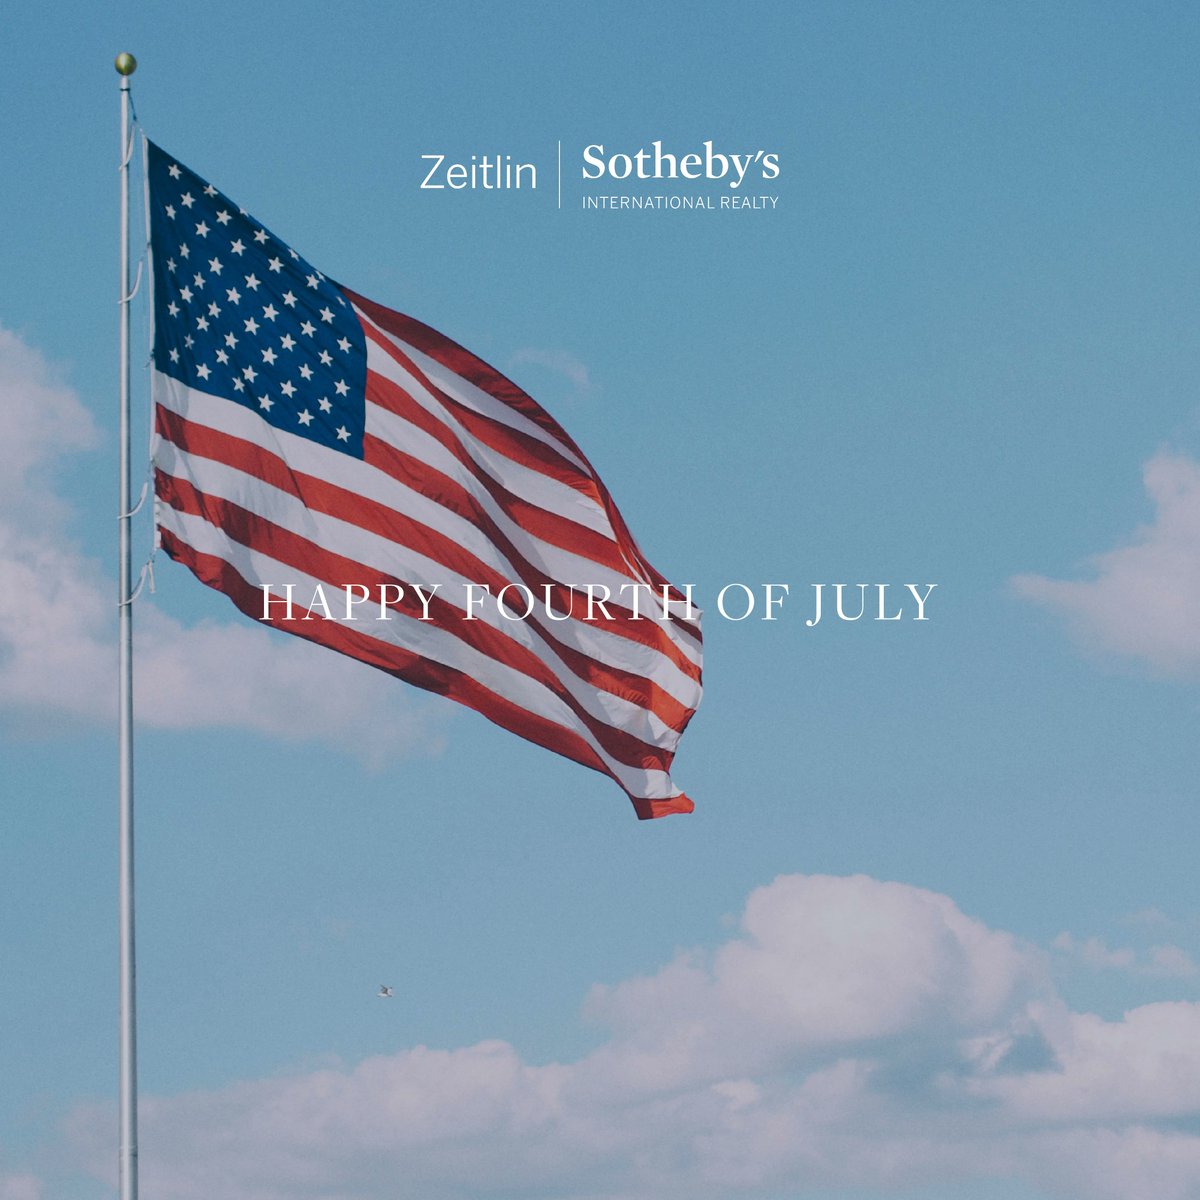 Have a wonderful, safe, and relaxing Fourth of July!

#zeitlinsir #zsir #tennessee #sothebysrealty #realestate #luxury #curbappeal #luxuryrealestate #design #home #homedesign #architecture #luxurylifestyle #luxe #luxuryhomes #luxurylife #epotd